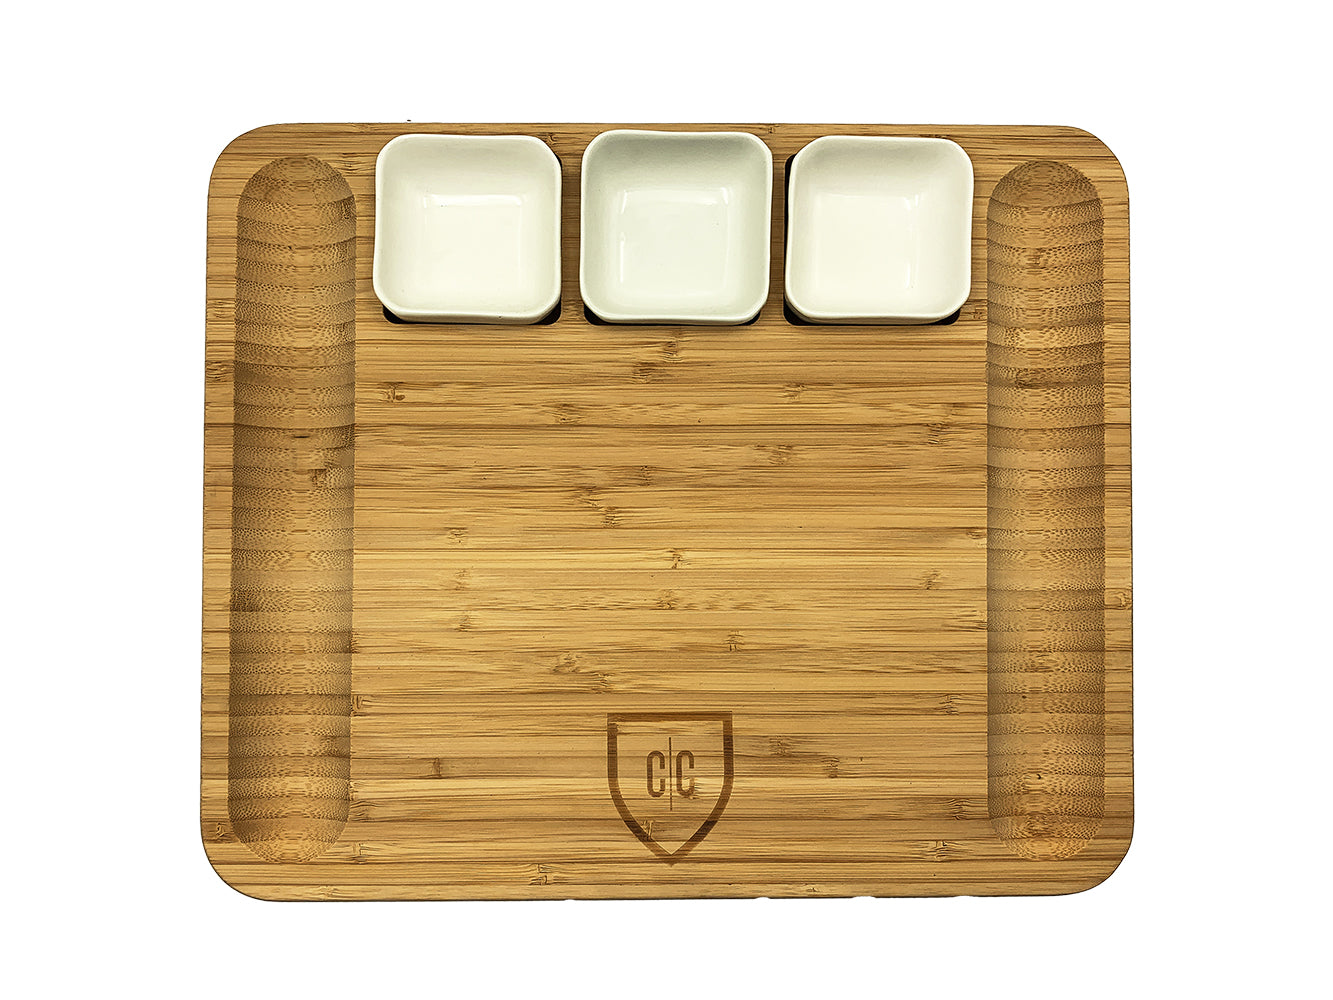 Disposable Cutting Board - pack of 30 – Hardcore Carnivore